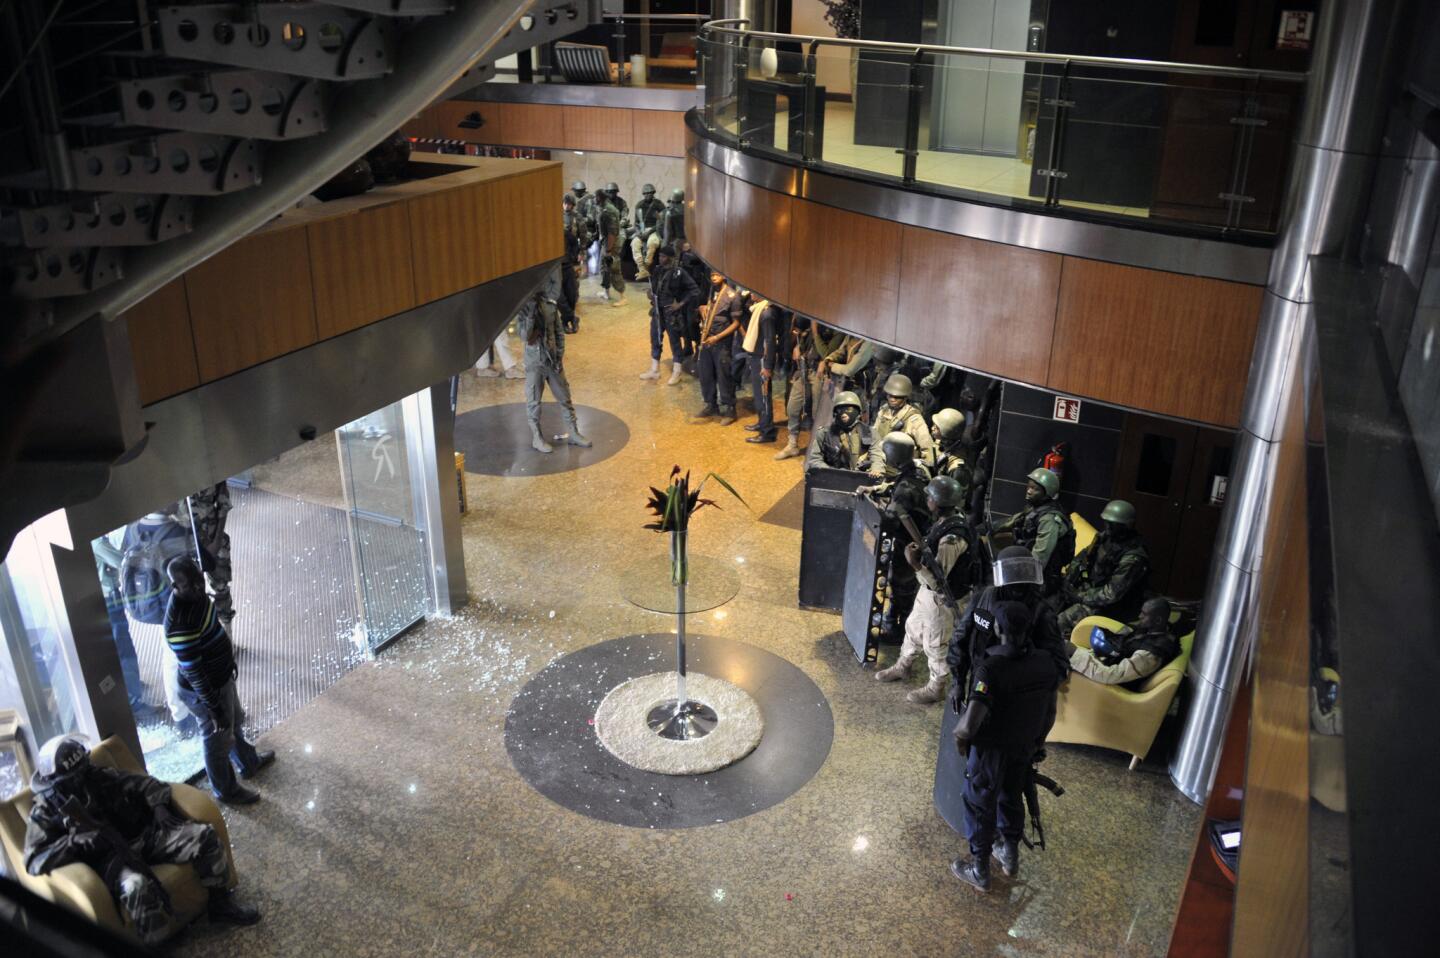 Security forces entered the Radisson Blu hotel in Bamako, Mali on Nov. 20, 2015, after it was stormed by gunmen. An extremist group led by a former al-Qaida commander claimed responsibility for the deadly attack.